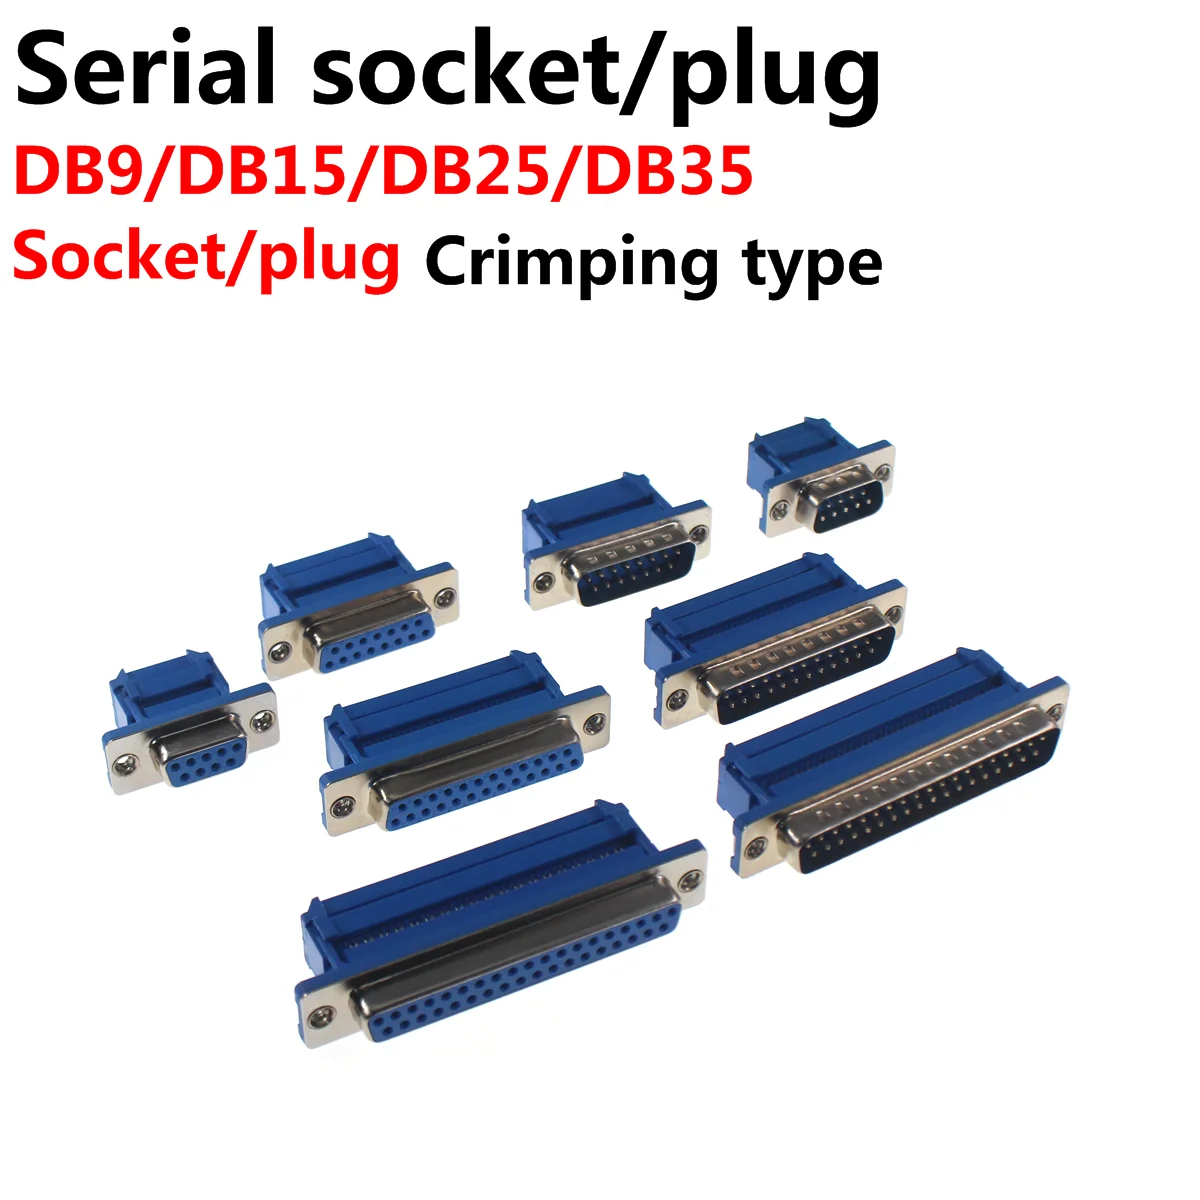 5PCS DB9 DB15 DB25 DB37 DIDC9/DIDC15/DIDC25/DIDC37 Male Female Plug Serial Port Connector Idc Crimp Type D-SUB Rs232 Adapter audio adapter connector for motorola radios xts5000 xts3000 ht1000 mts2000 2 pin headset port